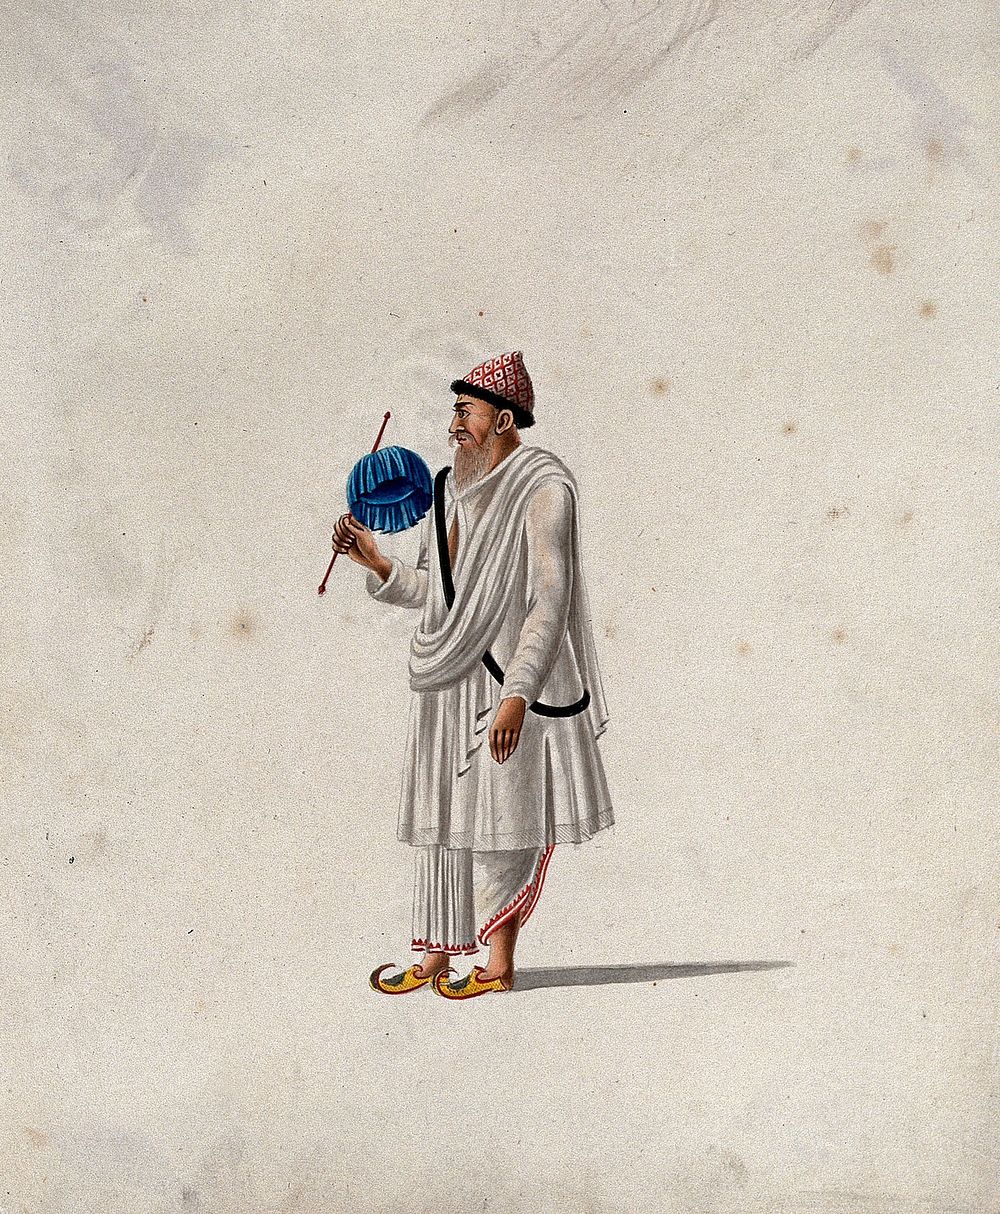 A man carrying a small canopy, attached to a pole. Gouache painting by an Indian artist.